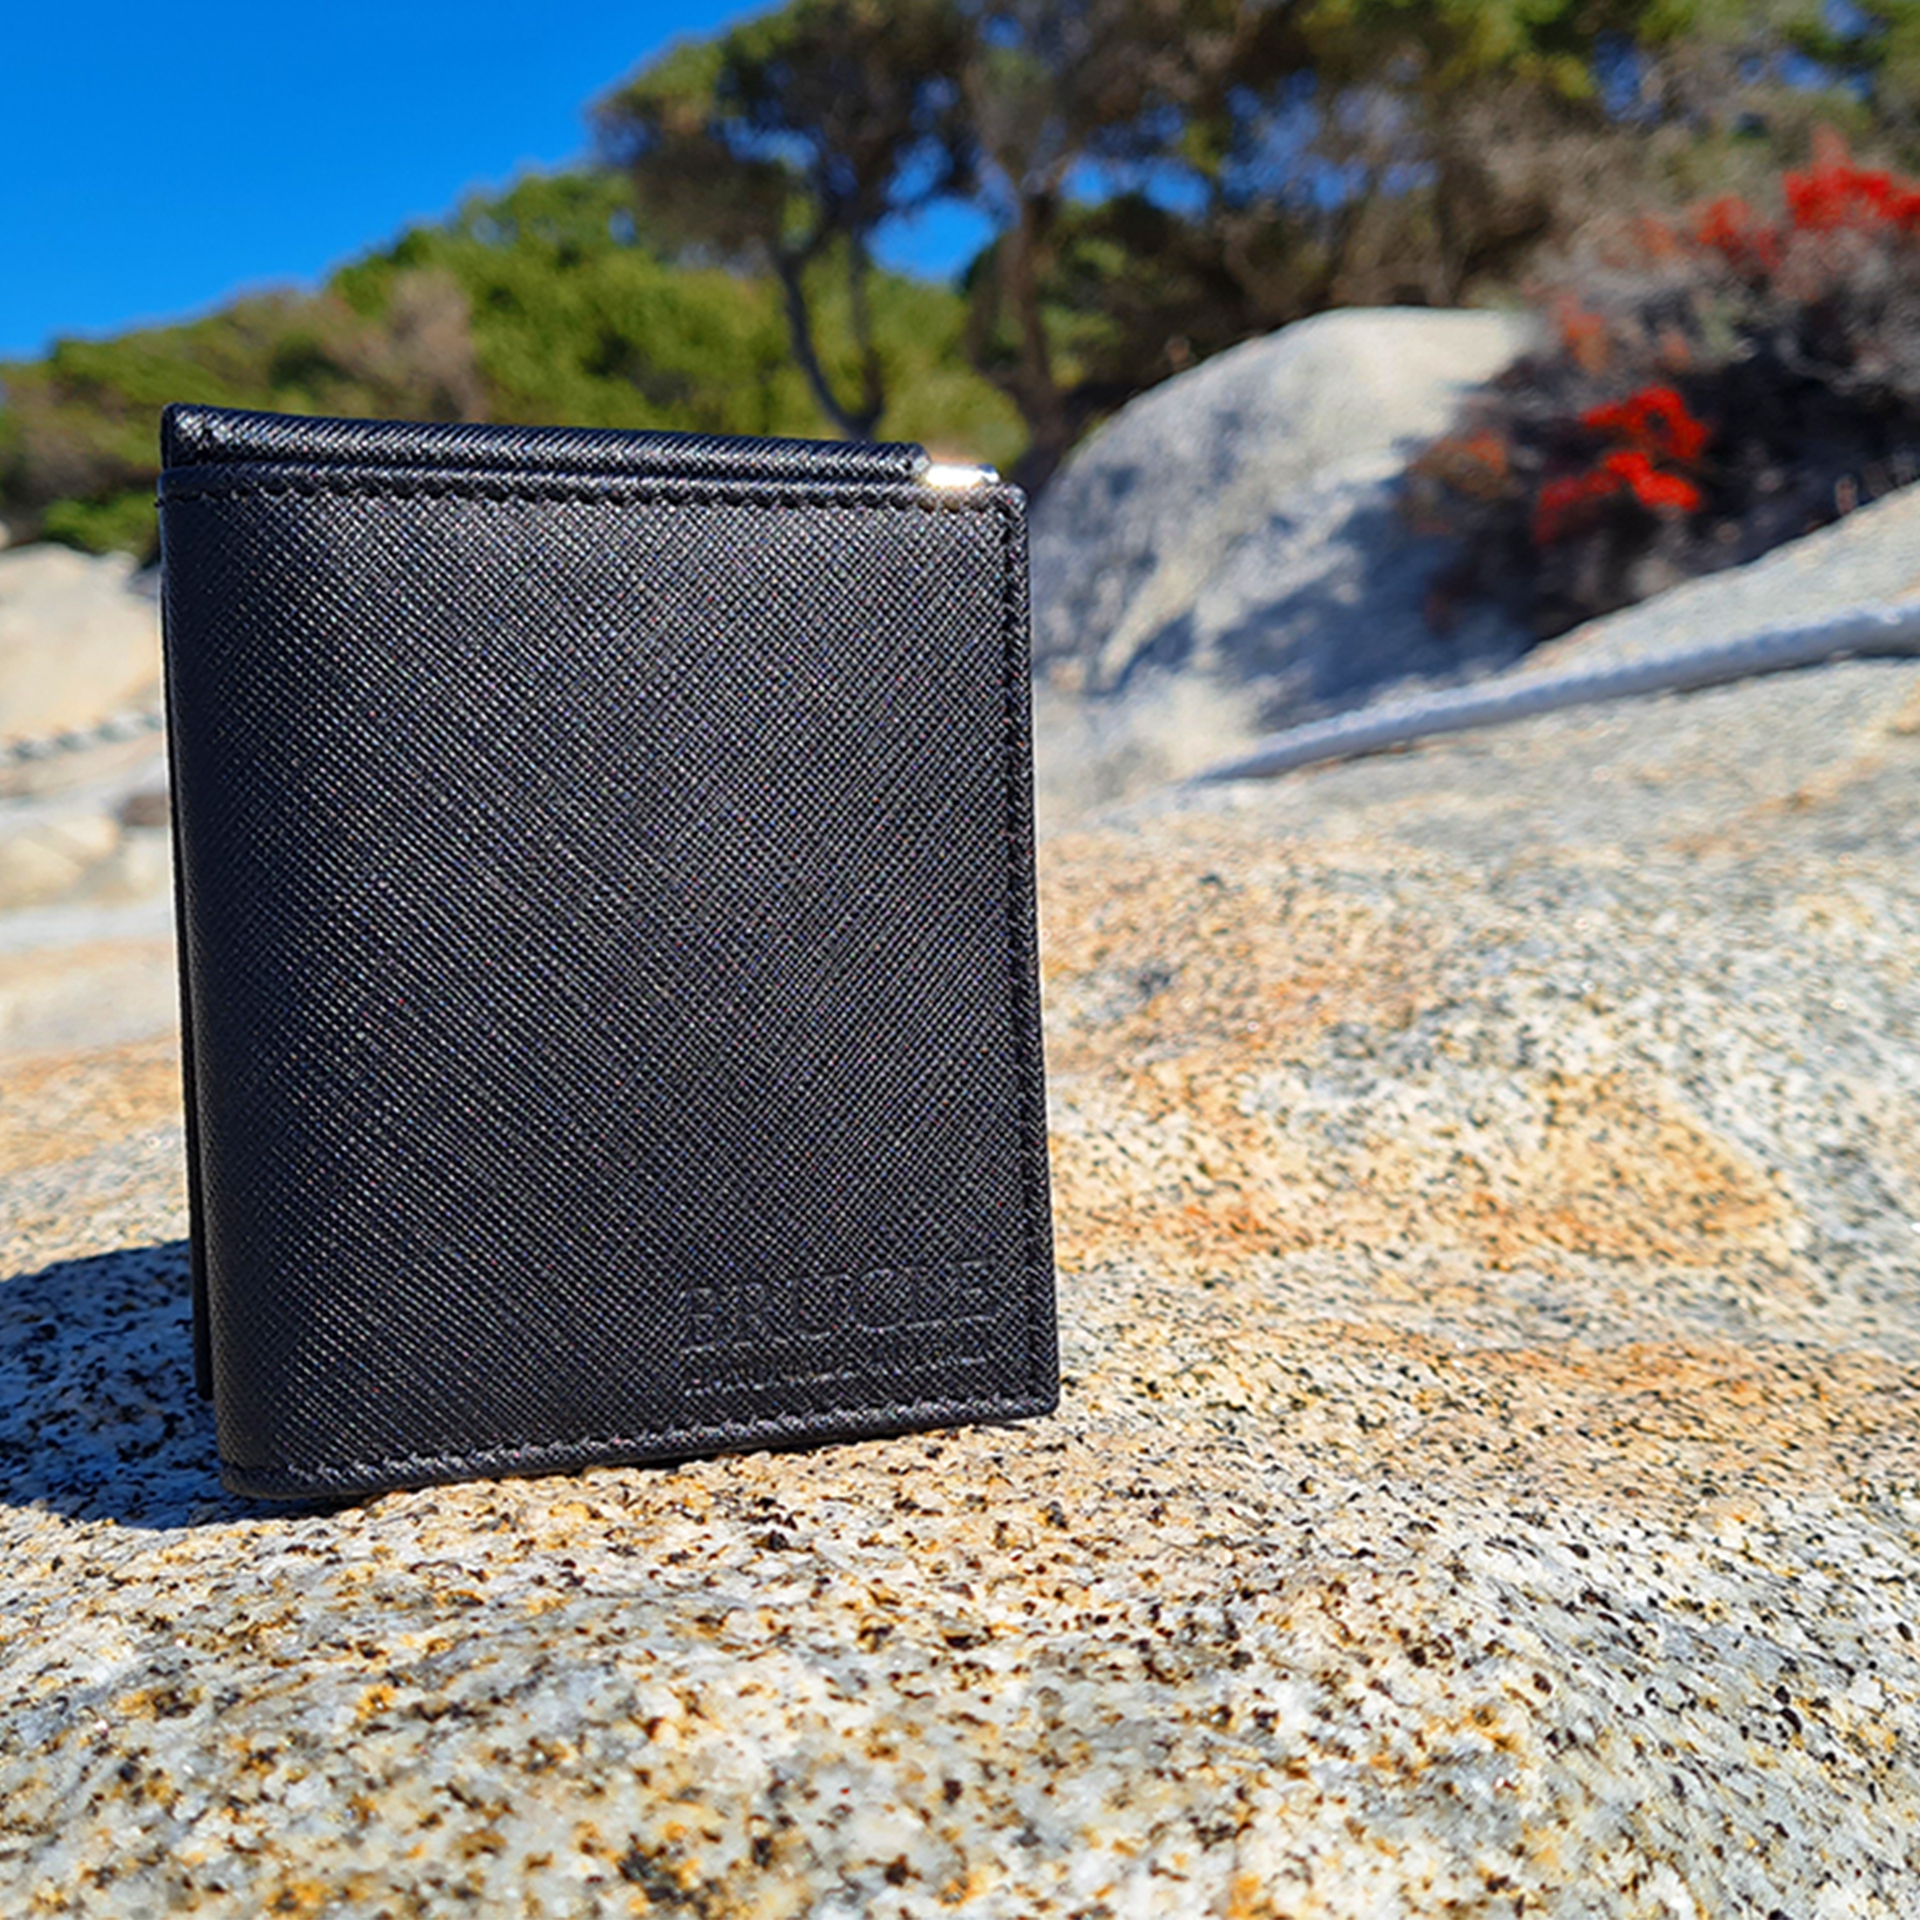 Saffiano Leather Wallet